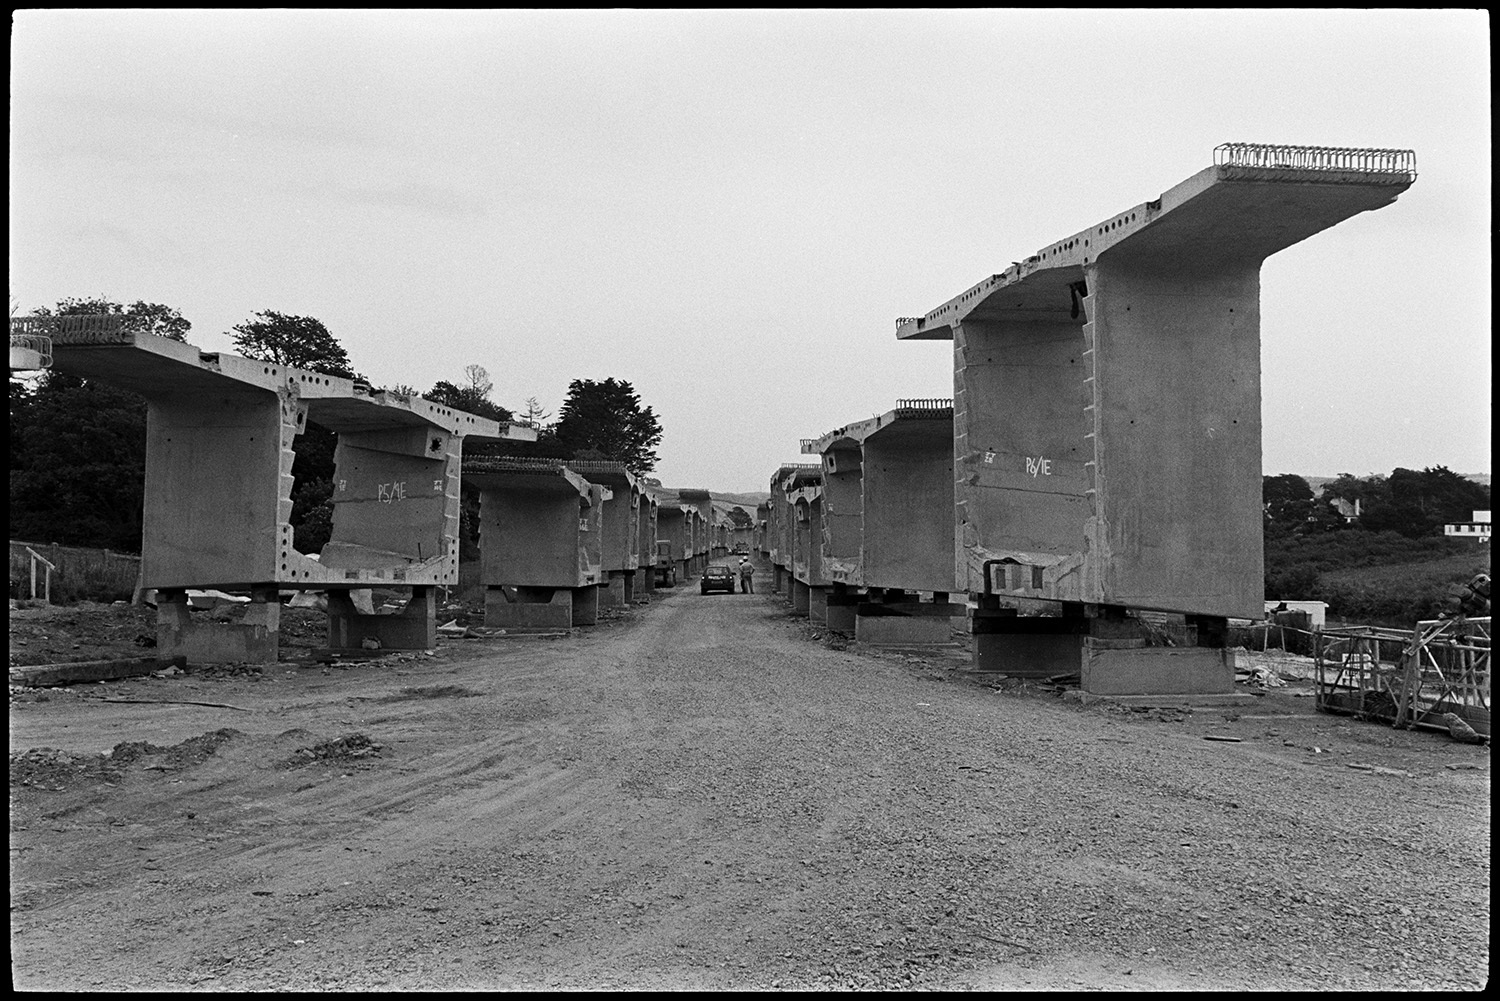 Sections of bridge before assembly, near the river. Concrete. 
[Concrete sections of Bideford New Bridge lined up in two rows on a track near to the River Torridge, before being assembled across the river. A car can be seen between the two rows.]